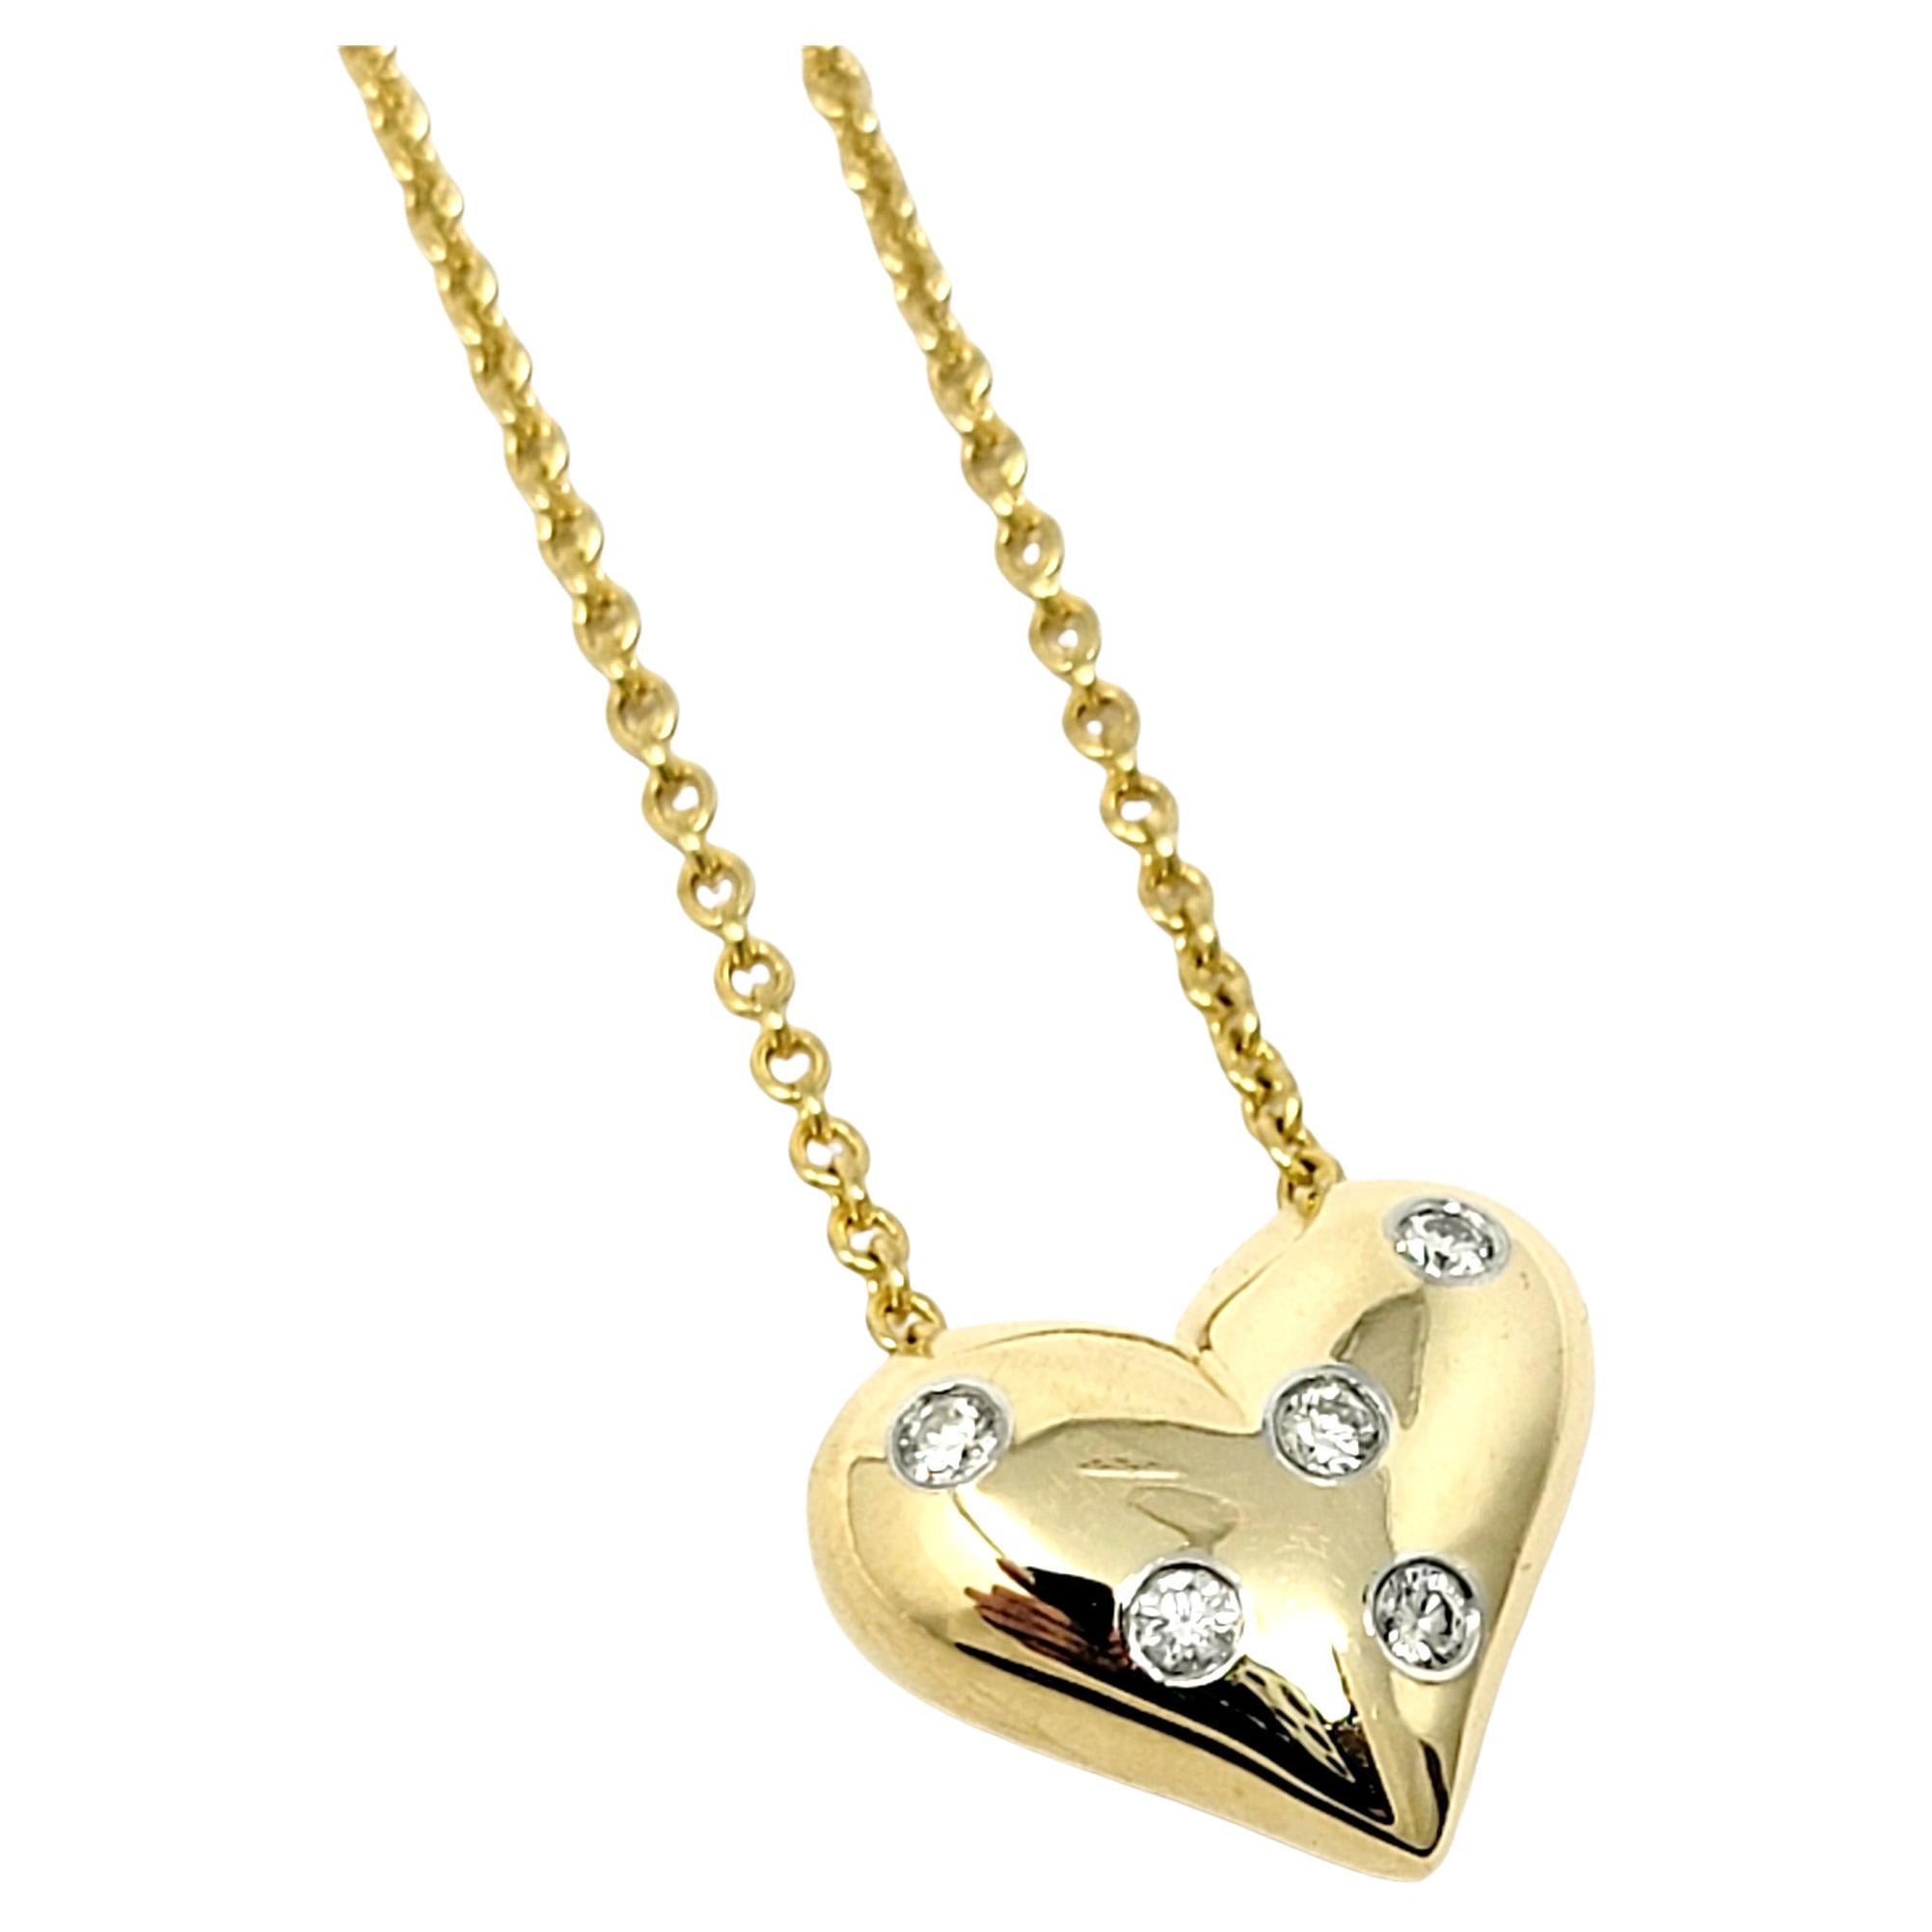 Absolutely gorgeous Etoile diamond heart pendant necklace from Tiffany & Co.. Dazzling round diamonds are scattered throughout this solid gold heart, offering sparkle from all angles. The feminine, romantic style radiates on the neck, while the